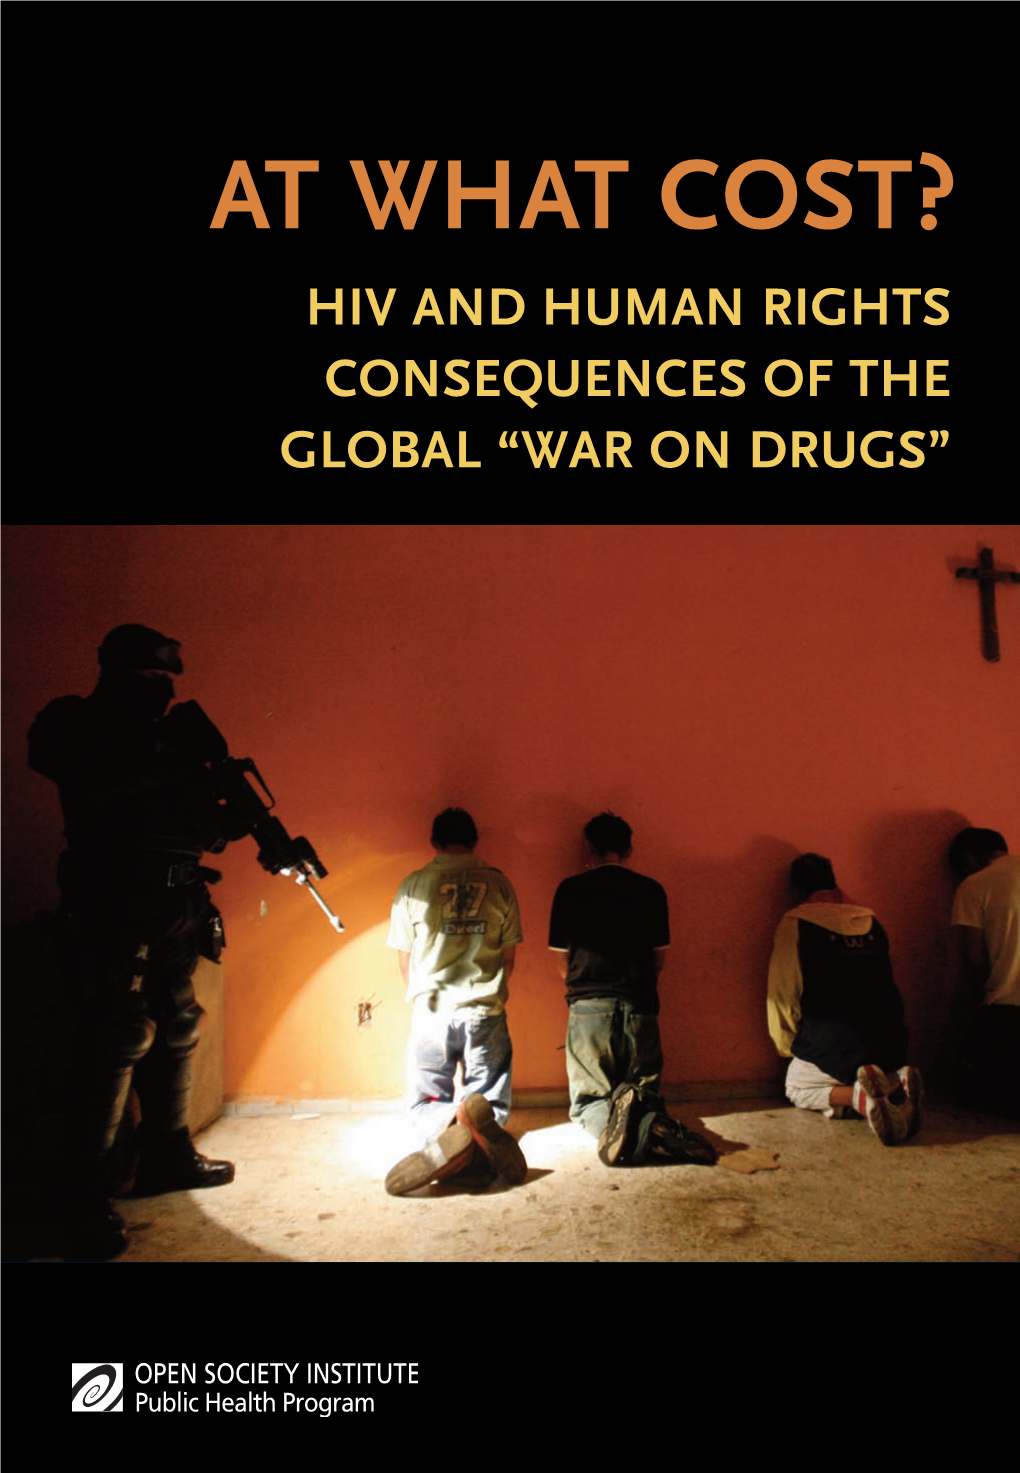 At What Cost? Hiv and Human Rights Consequences of the Global “War on Drugs”